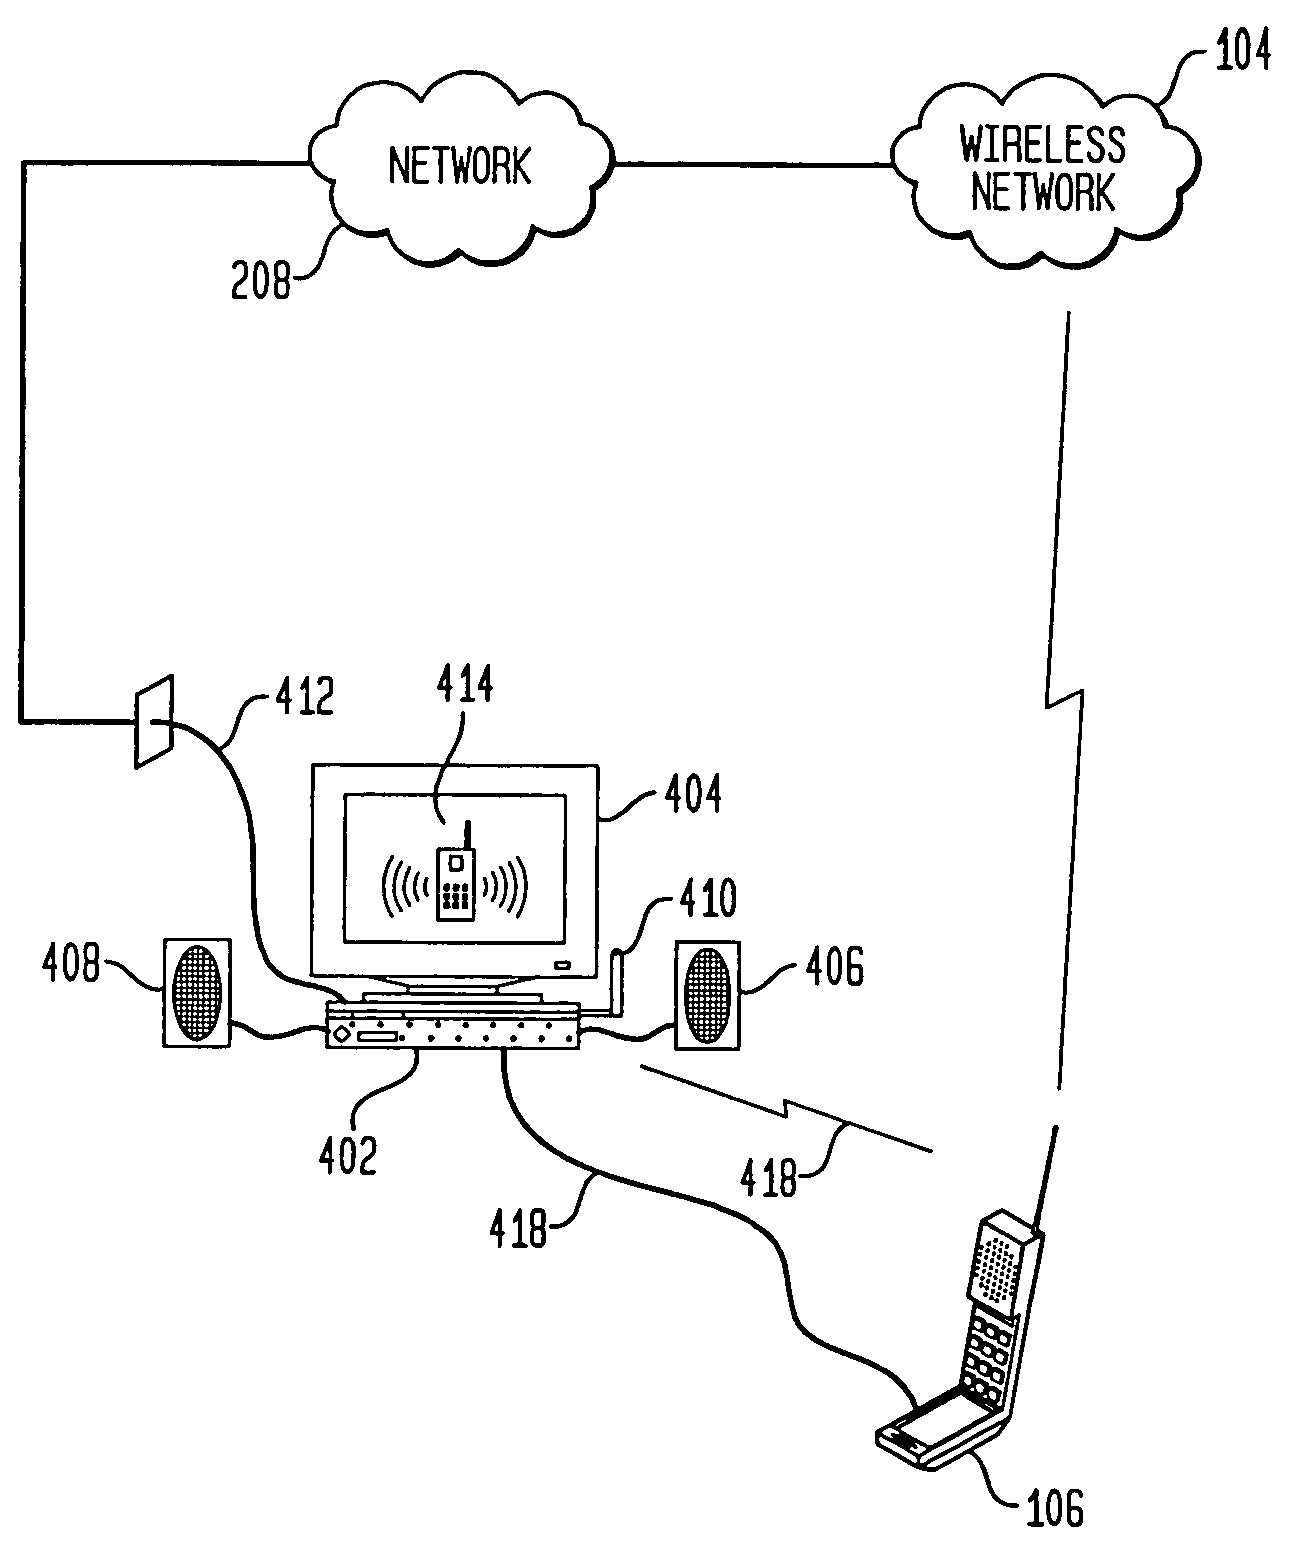 Centralized display for mobile devices